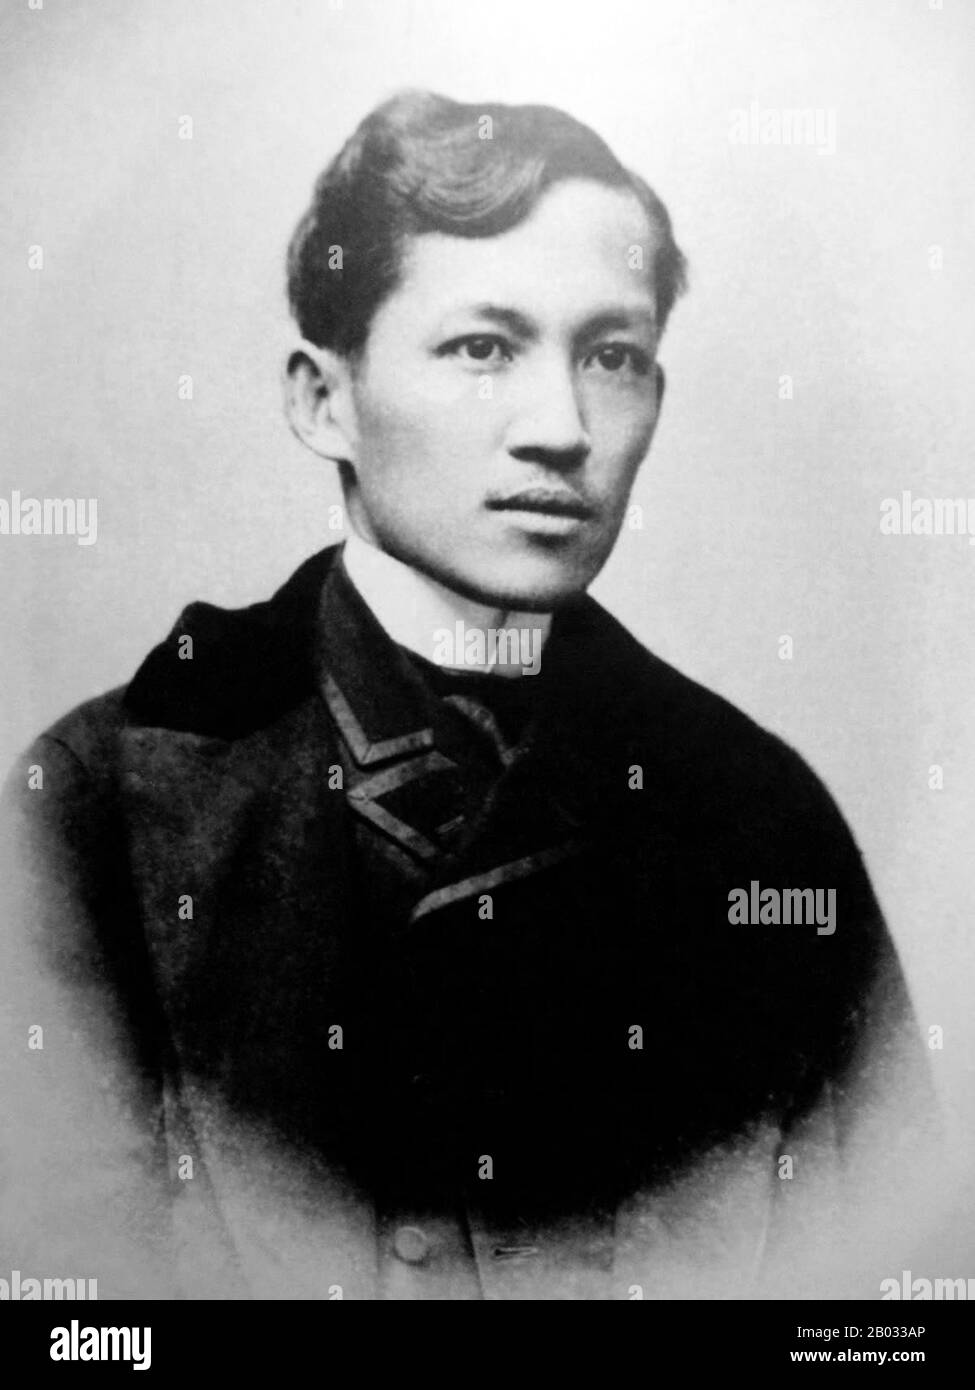 Jose Protasio Rizal Mercado y Alonso Realonda or popularly known as Jose Rizal (19 June 1861 – 30 December 1896) was a Filipino nationalist and polymath during the last years of the Spanish colonial period of the Philippines.  An ophthalmologist by profession, Rizal became a writer and a key member of the Filipino Propaganda Movement which advocated political reforms for the colony under Spain. He was executed by the Spanish colonial government for the crime of rebellion after an anti-colonial revolution, inspired in part by his writings, broke out.  Though he was not actively involved in its Stock Photo